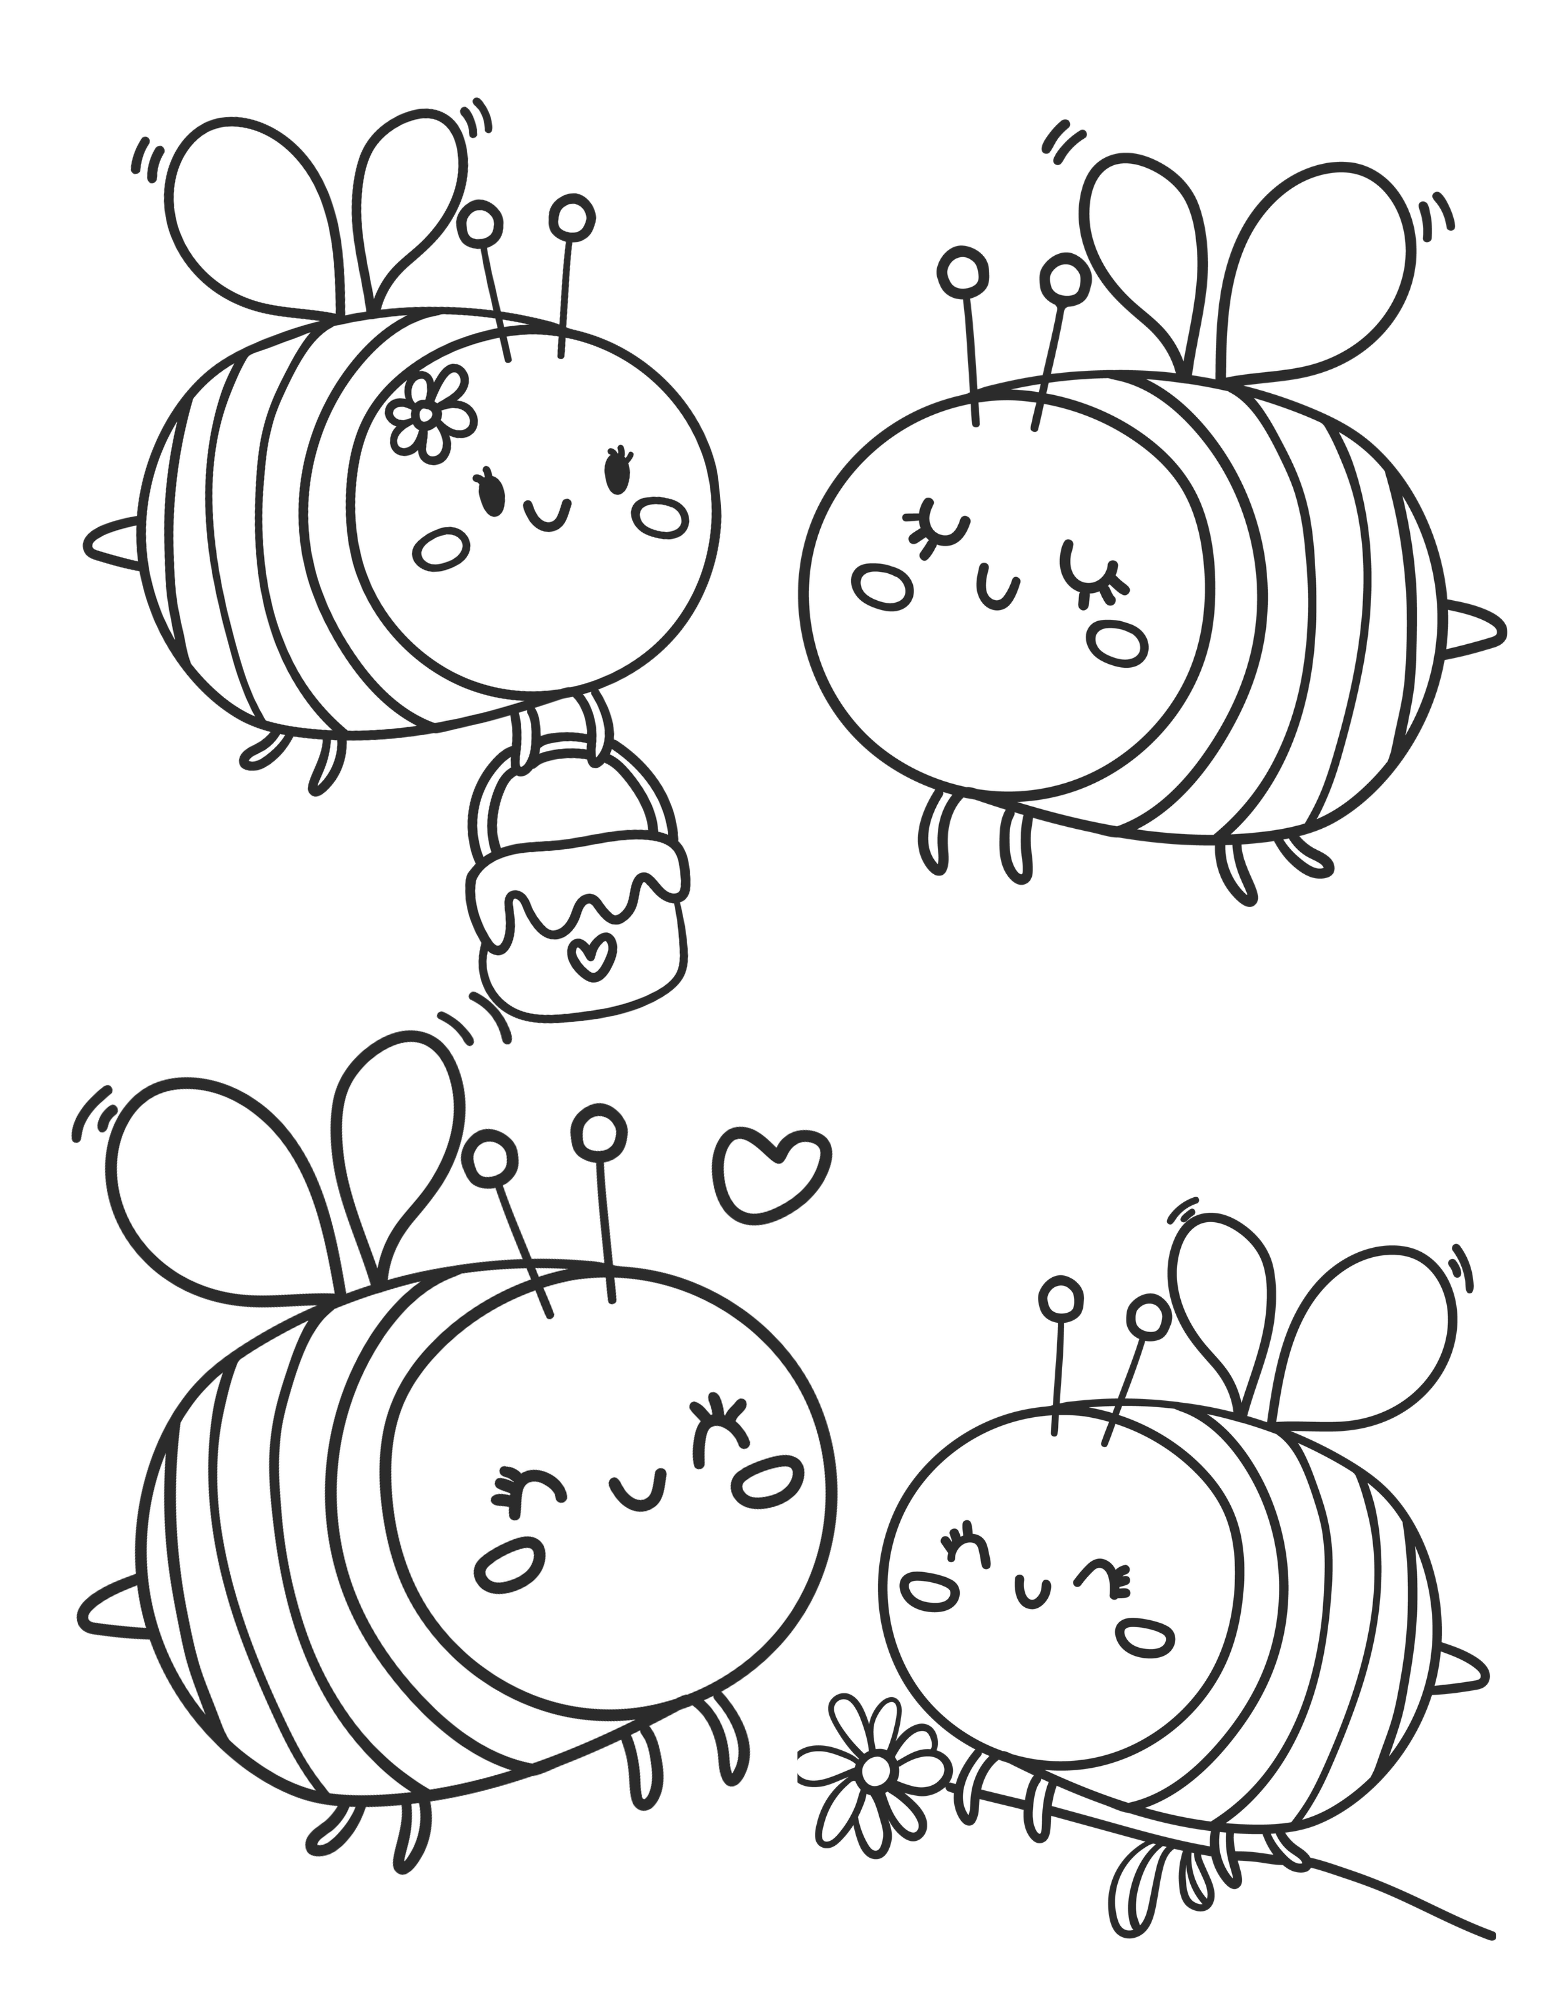 Get buzzy with these fun bee coloring pages for kids and adults